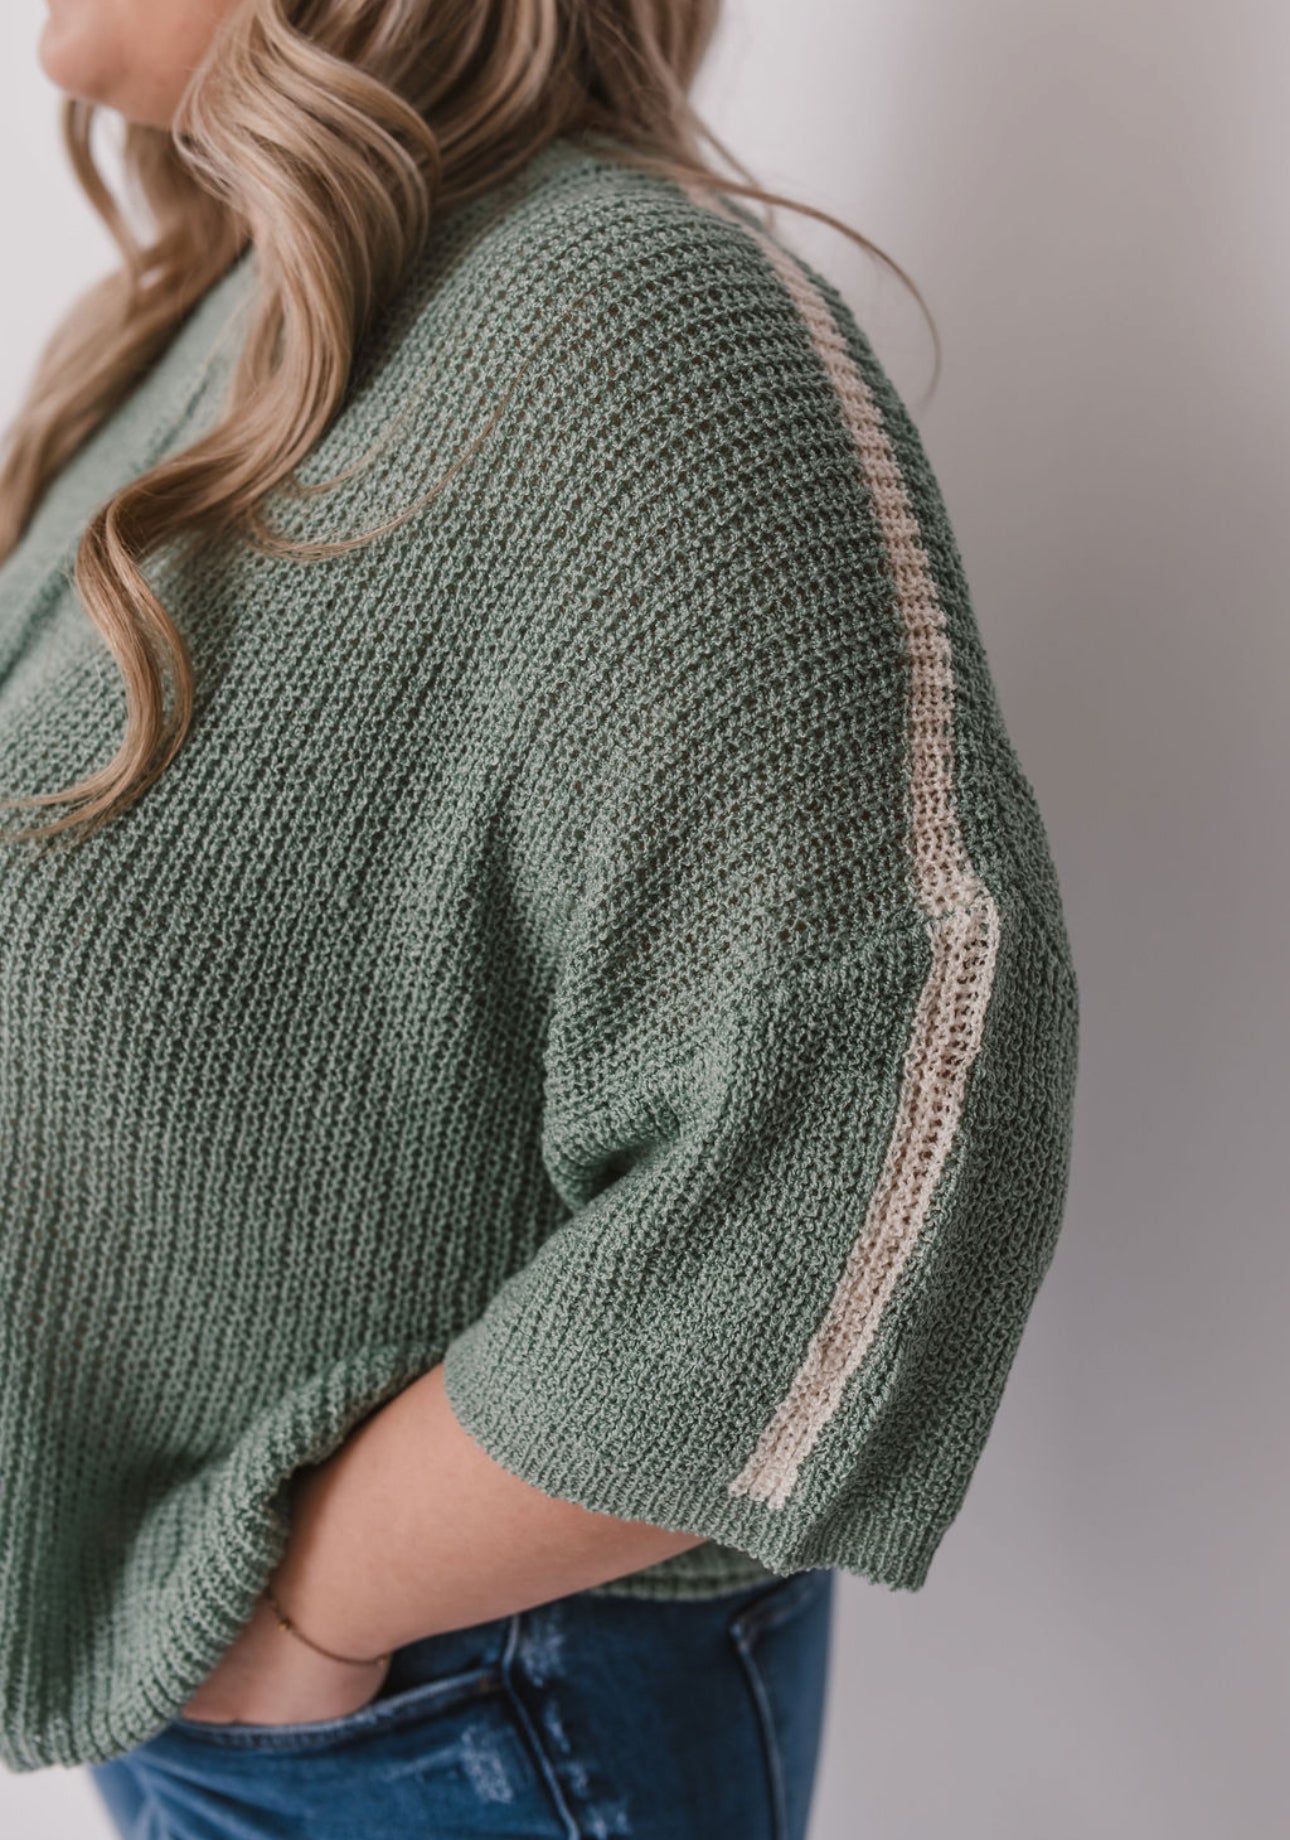 The Breezy Knit Sweater